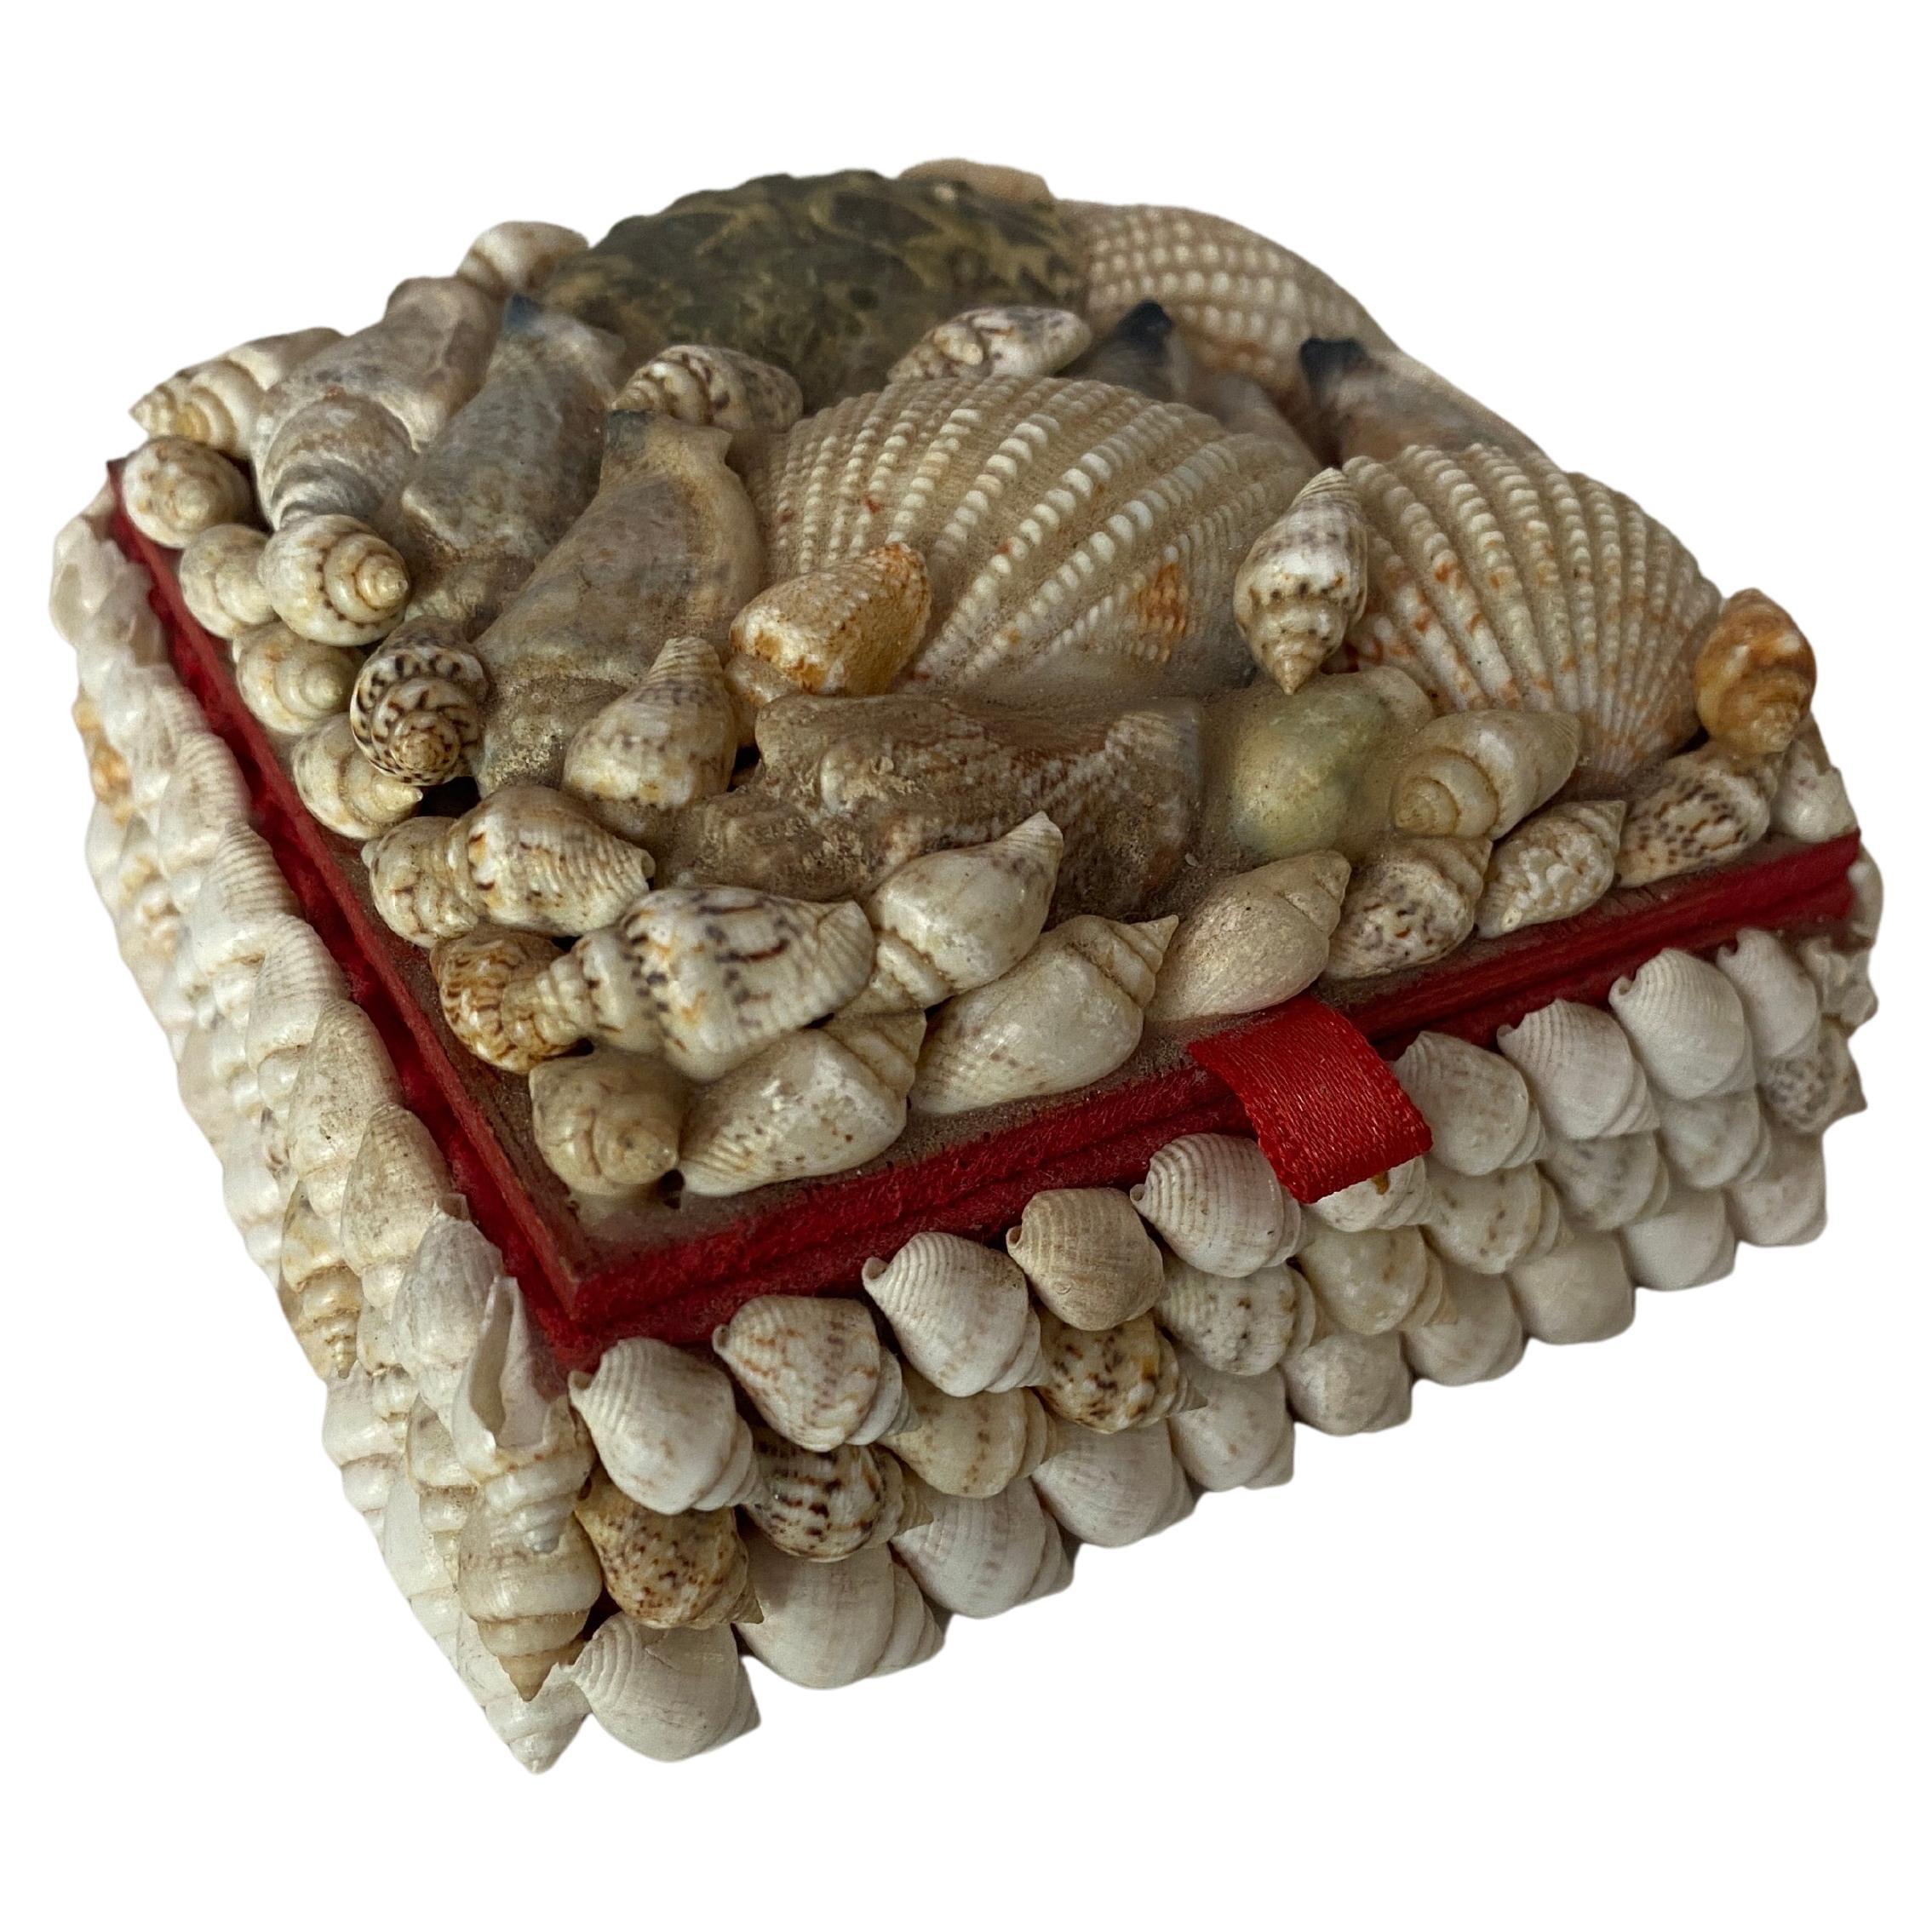 Jewelry Box or Decorative Box in Shelll and Wood White Color France 20th Century For Sale